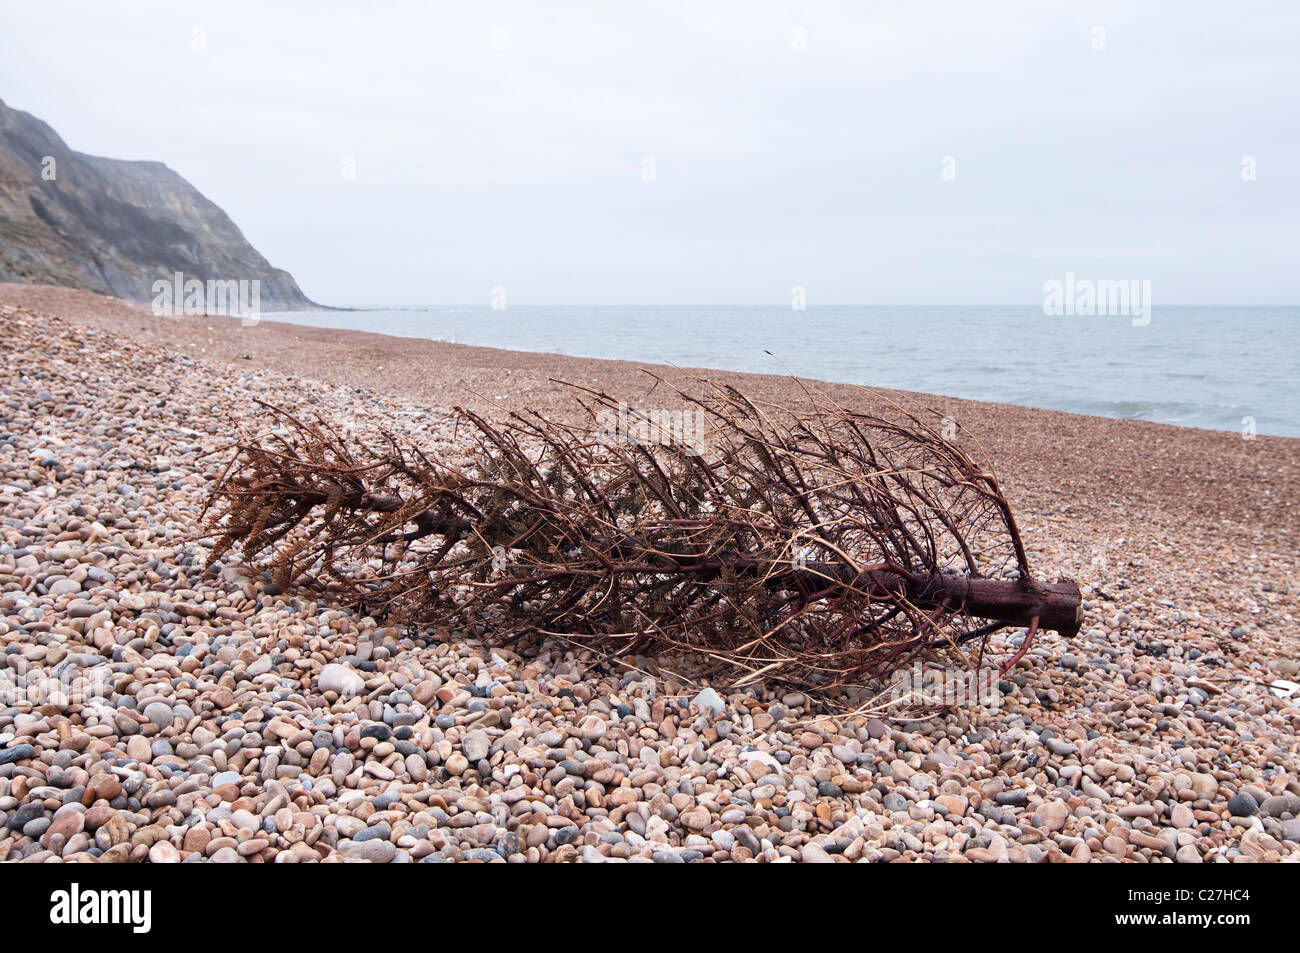 An discarded Christmas tree washed up on the pebble beach at Seatown, Dorset, UK. Stock Photo